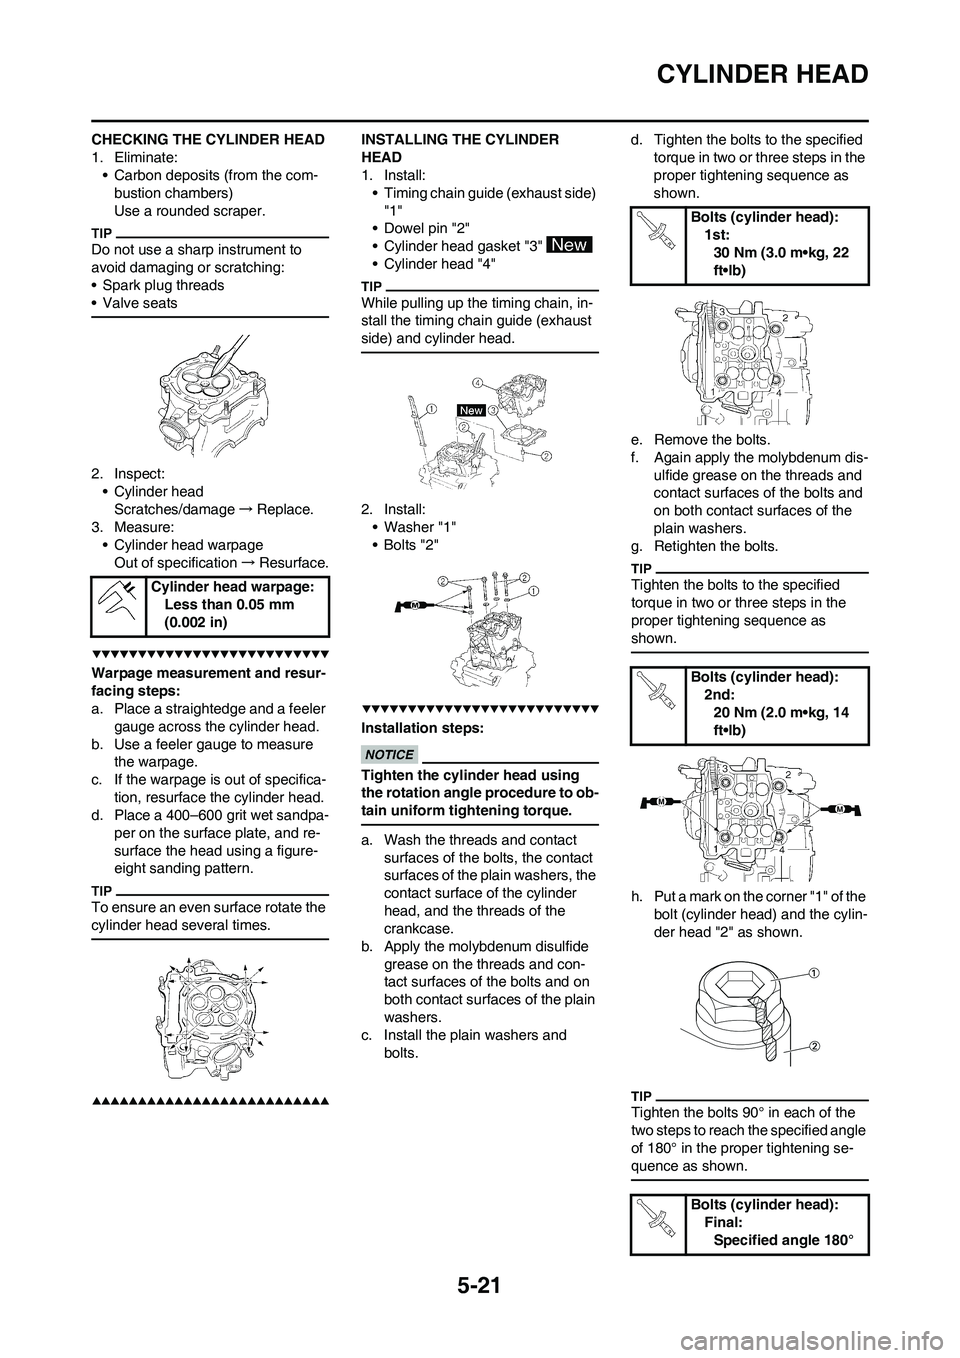 YAMAHA WR 450F 2009  Owners Manual 5-21
CYLINDER HEAD
CHECKING THE CYLINDER HEAD
1. Eliminate:
• Carbon deposits (from the com-
bustion chambers)
Use a rounded scraper.
Do not use a sharp instrument to 
avoid damaging or scratching:
